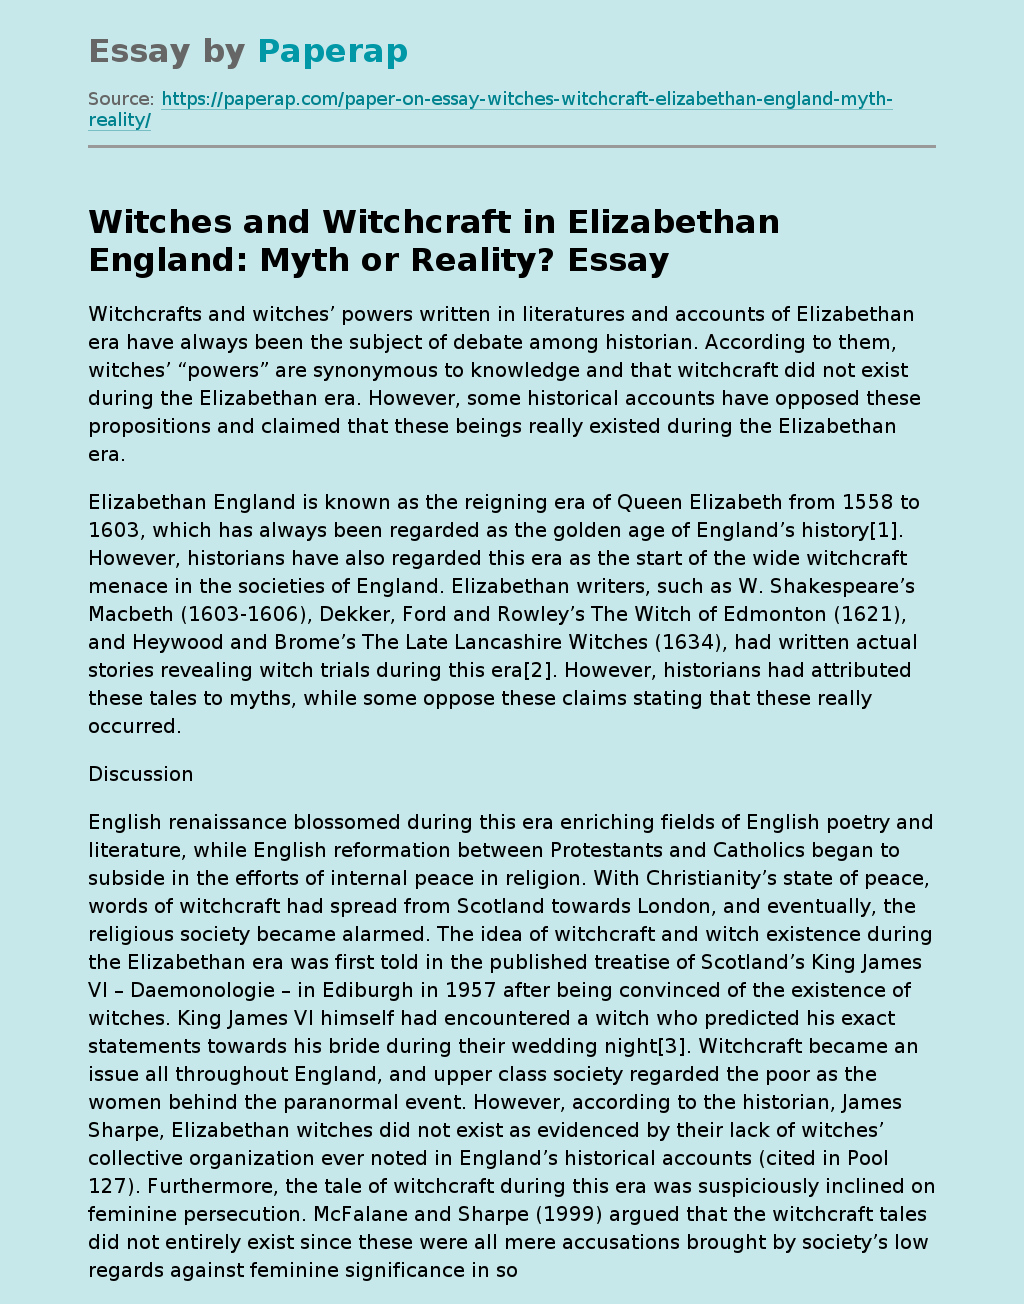 Witches and Witchcraft in Elizabethan England: Myth or Reality?